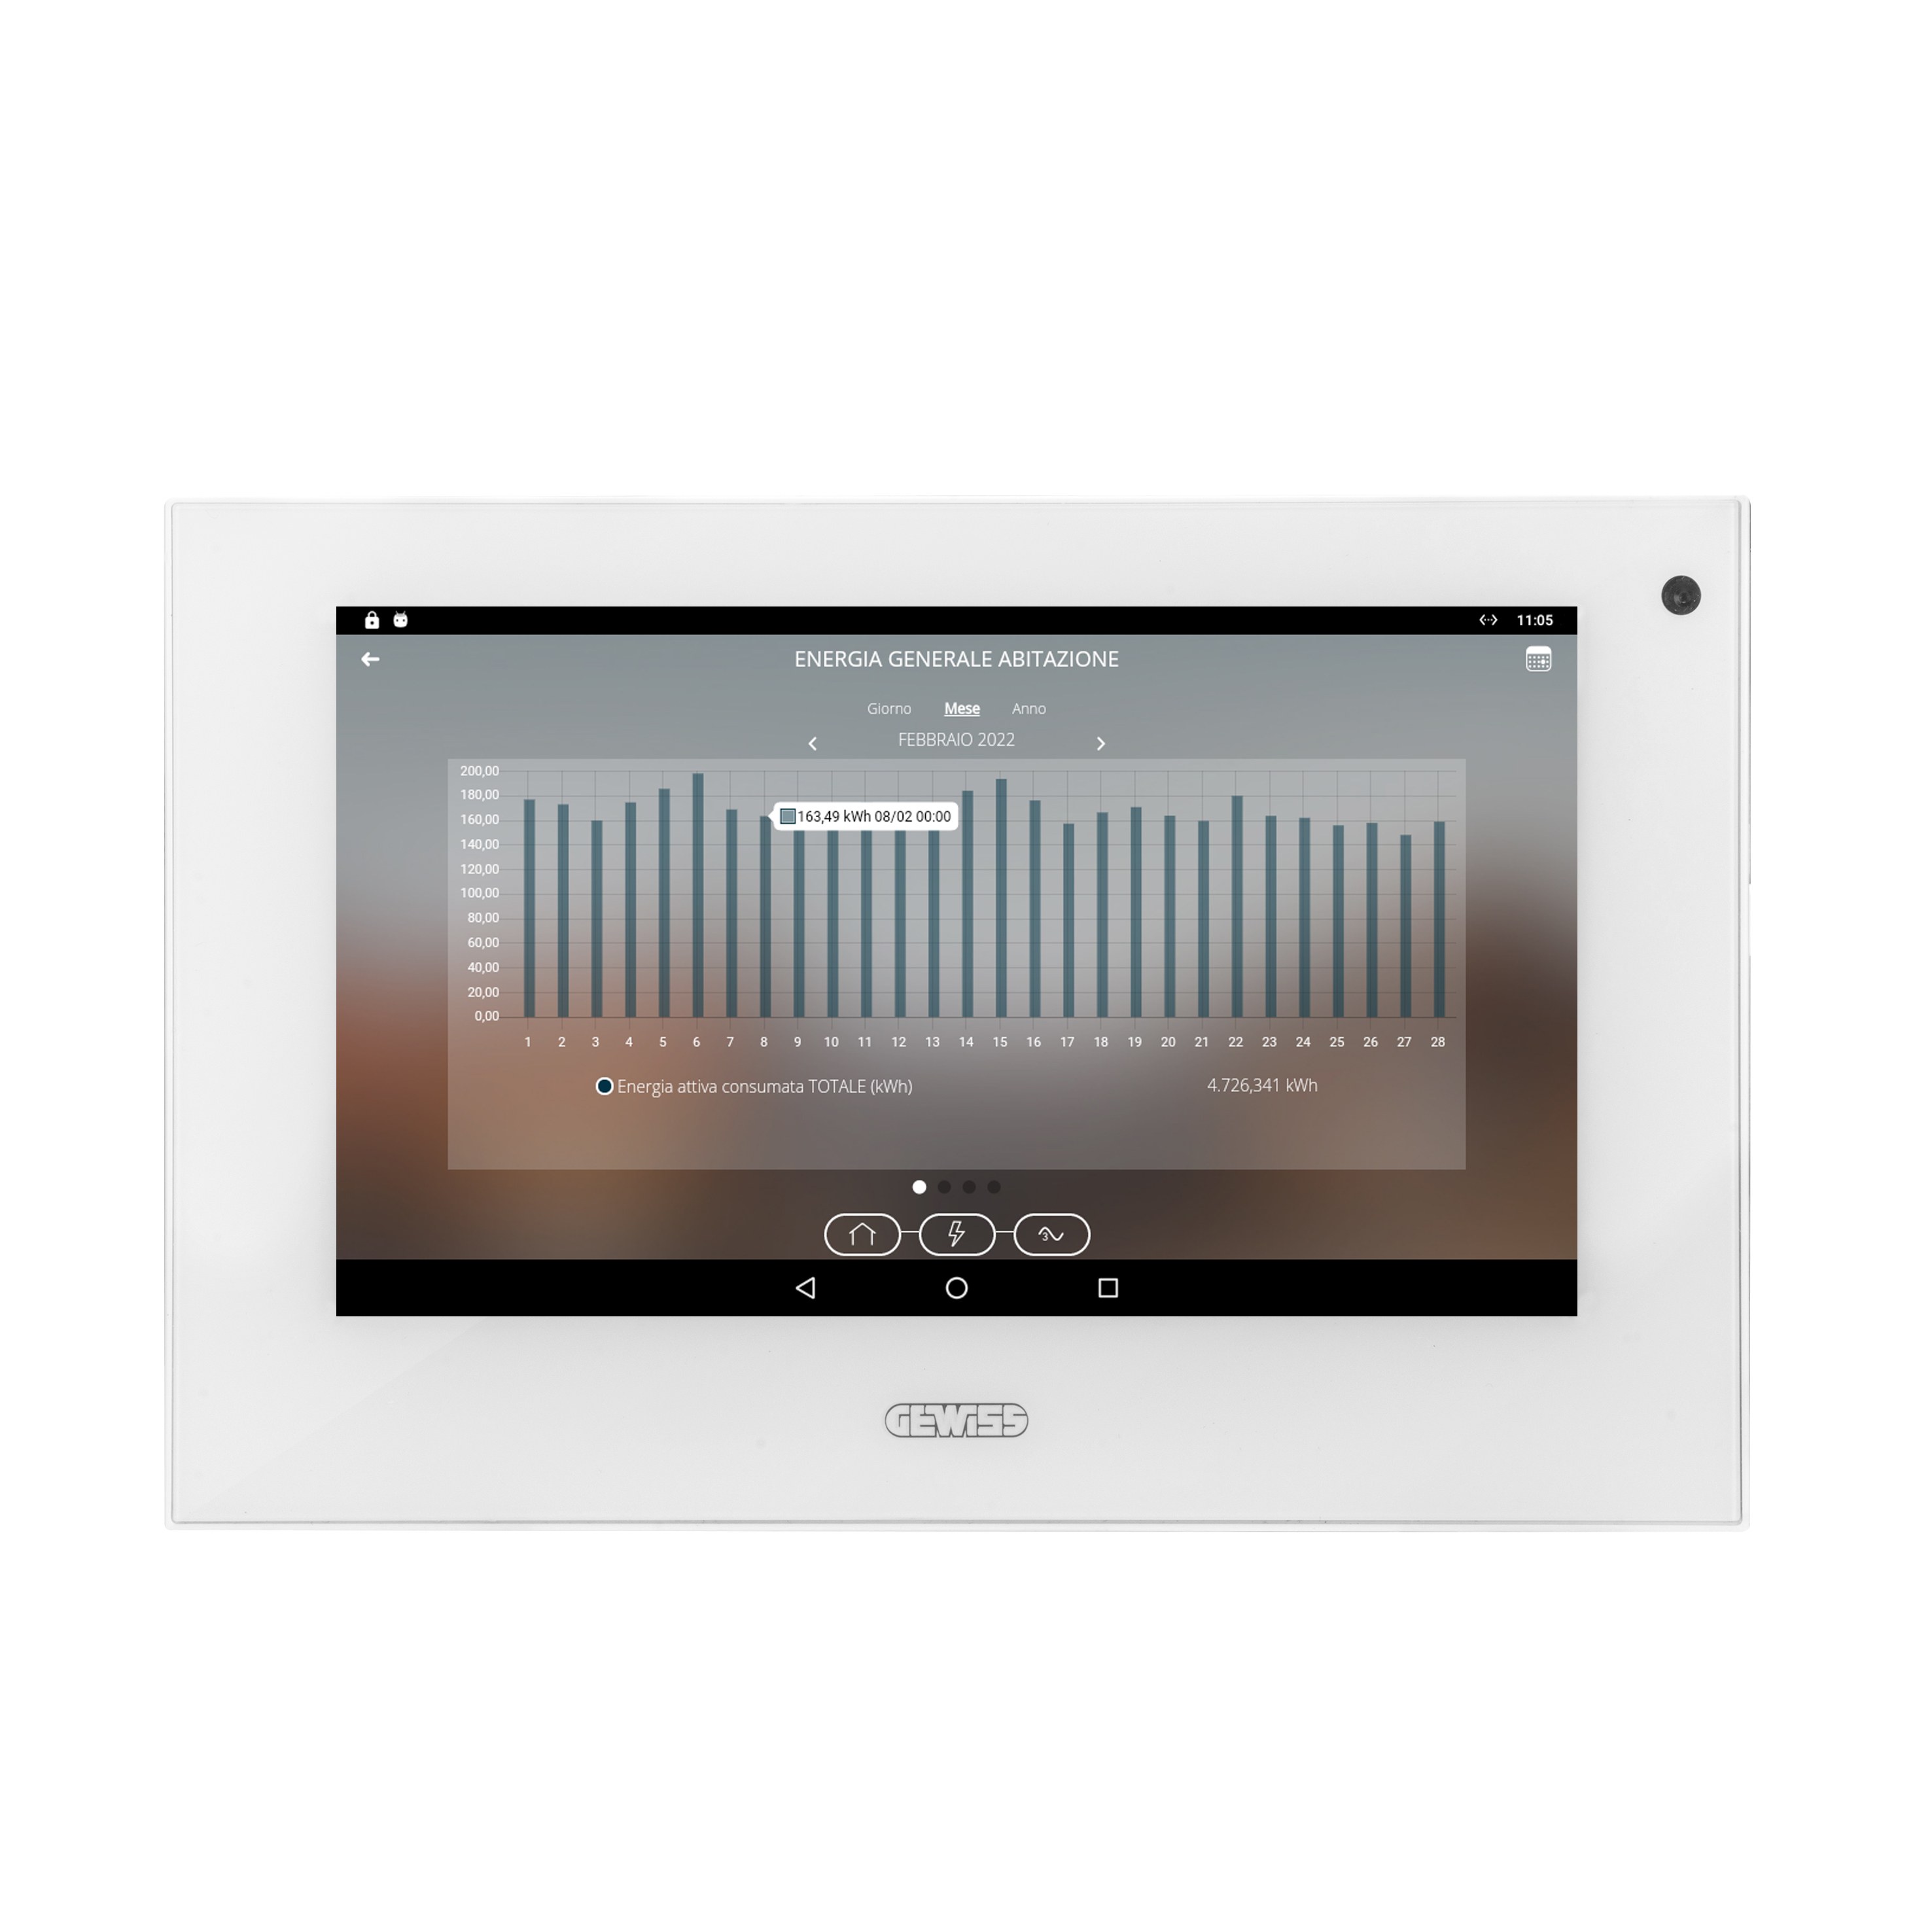 PANNELLO TOUCH SCREEN 7'' BIANCO